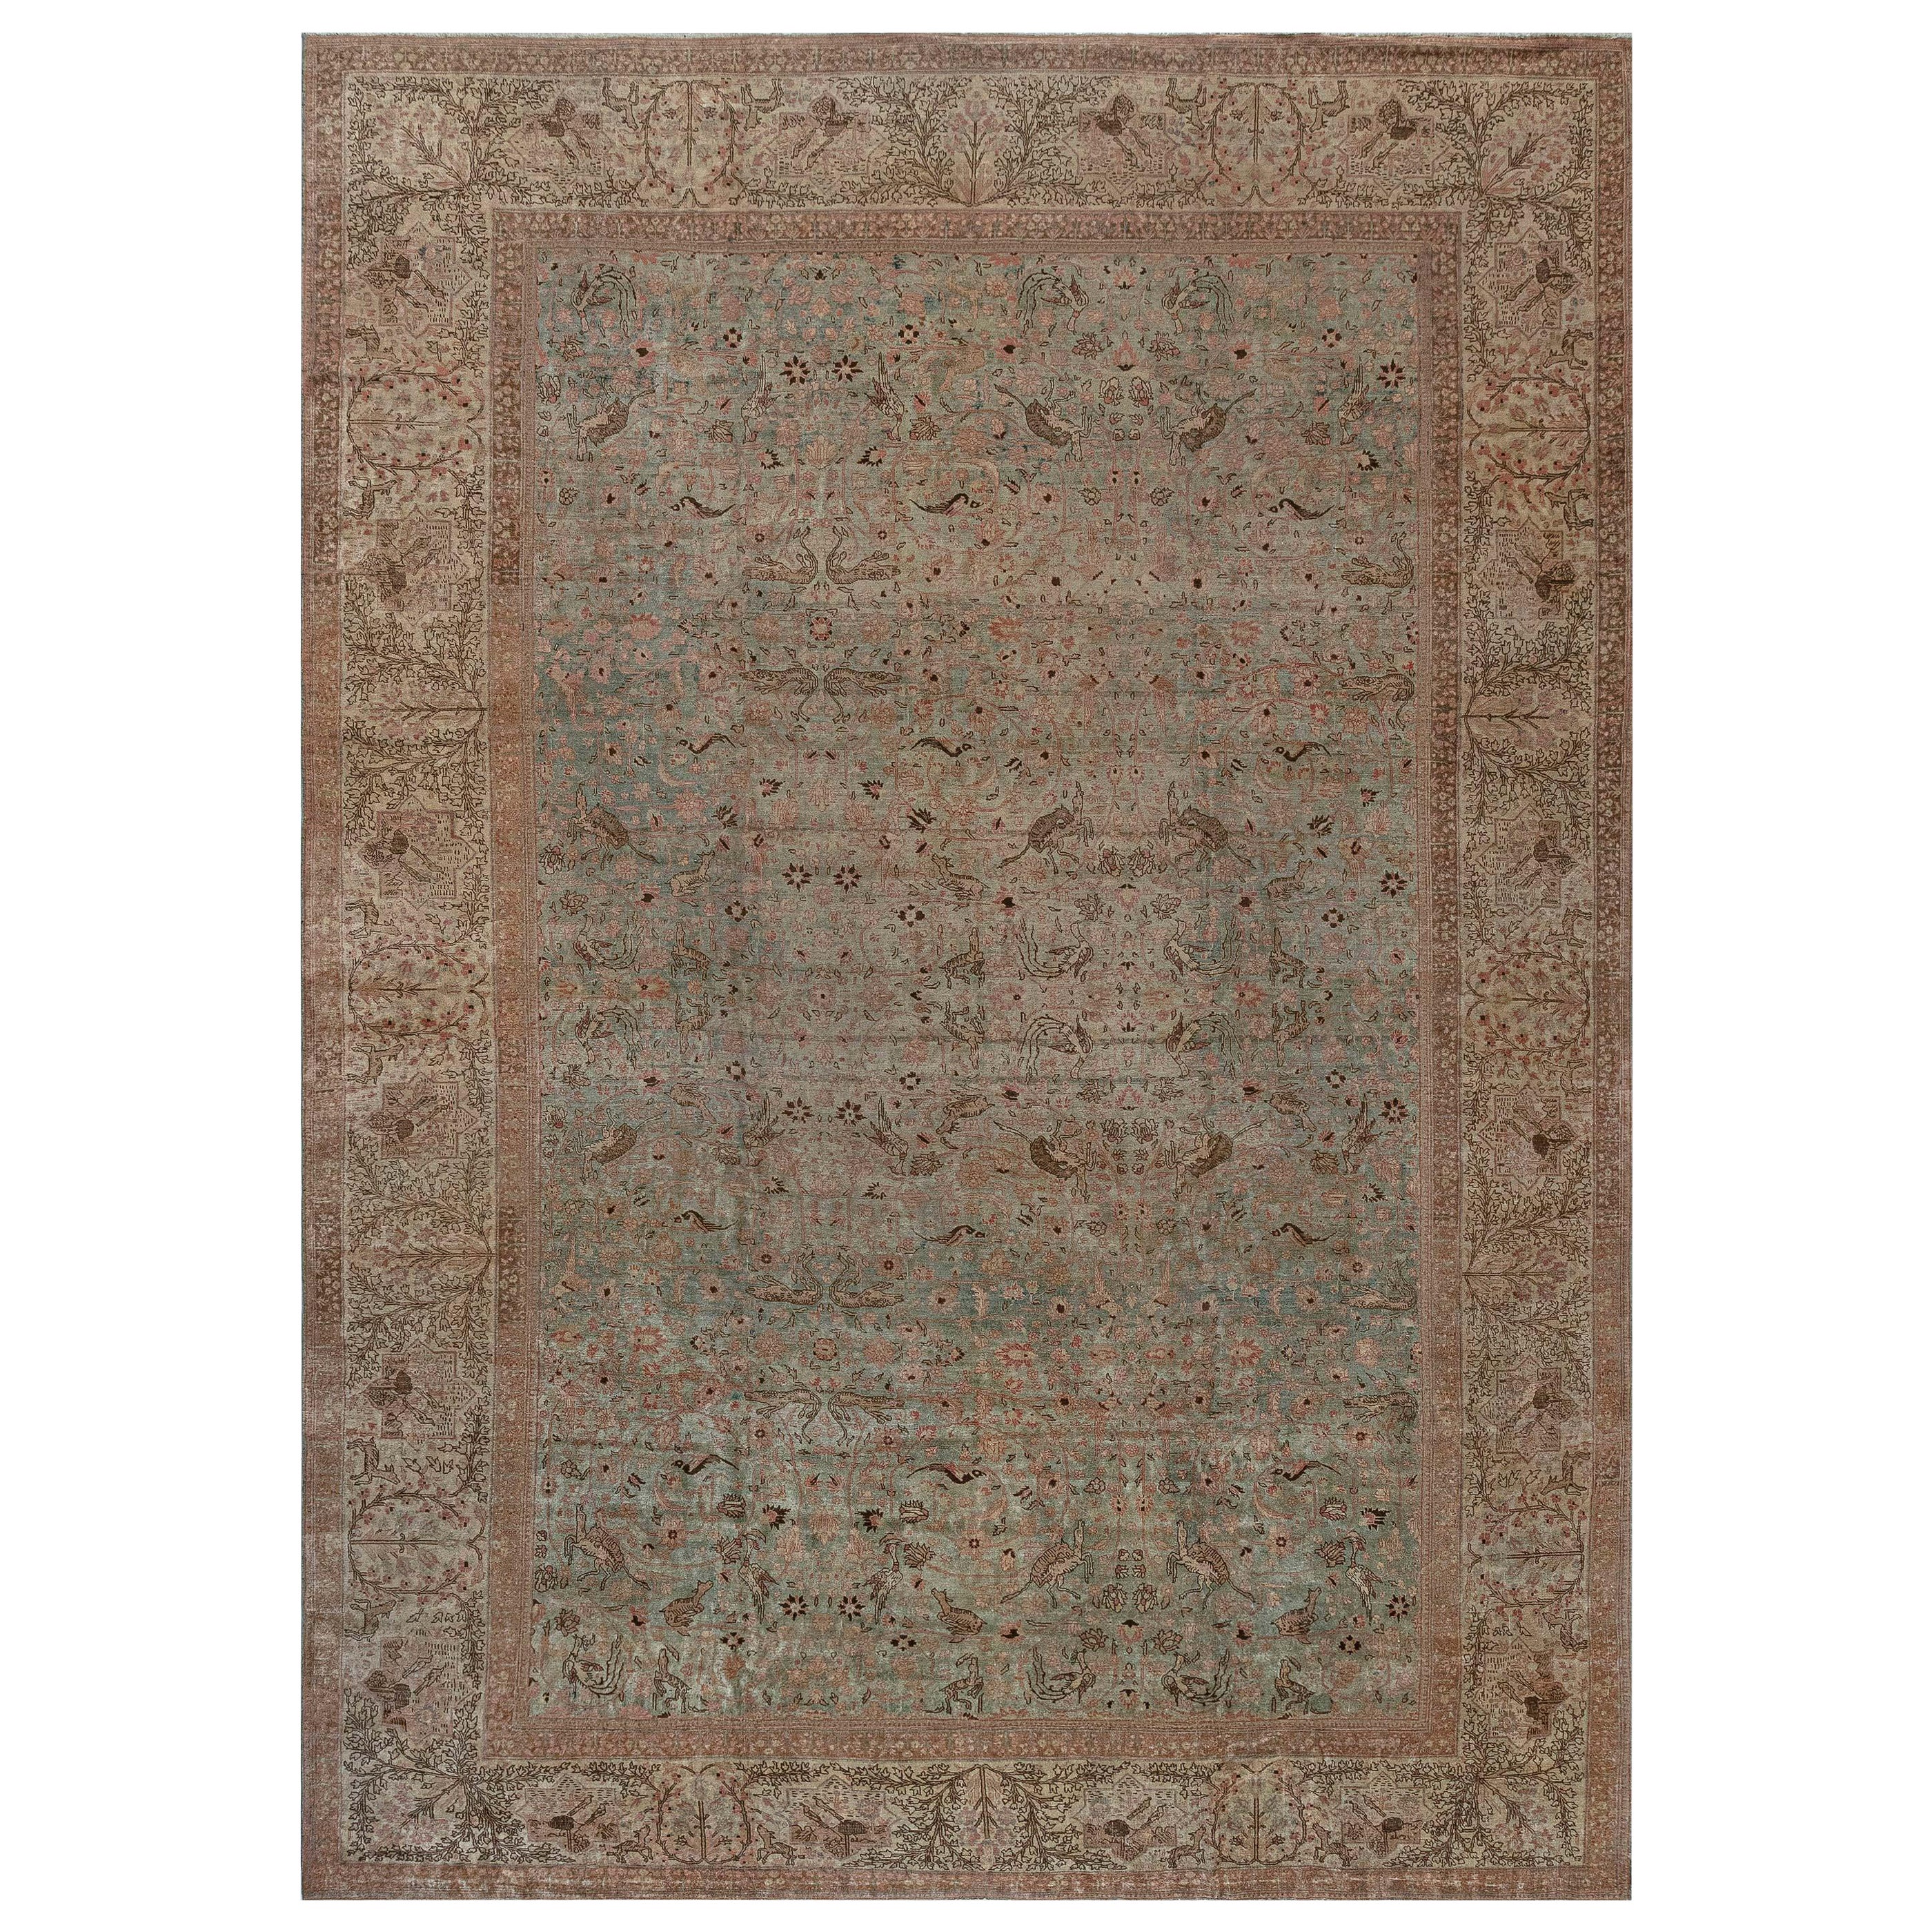 Authentic Persian Tabriz Handmade Wool Rug For Sale